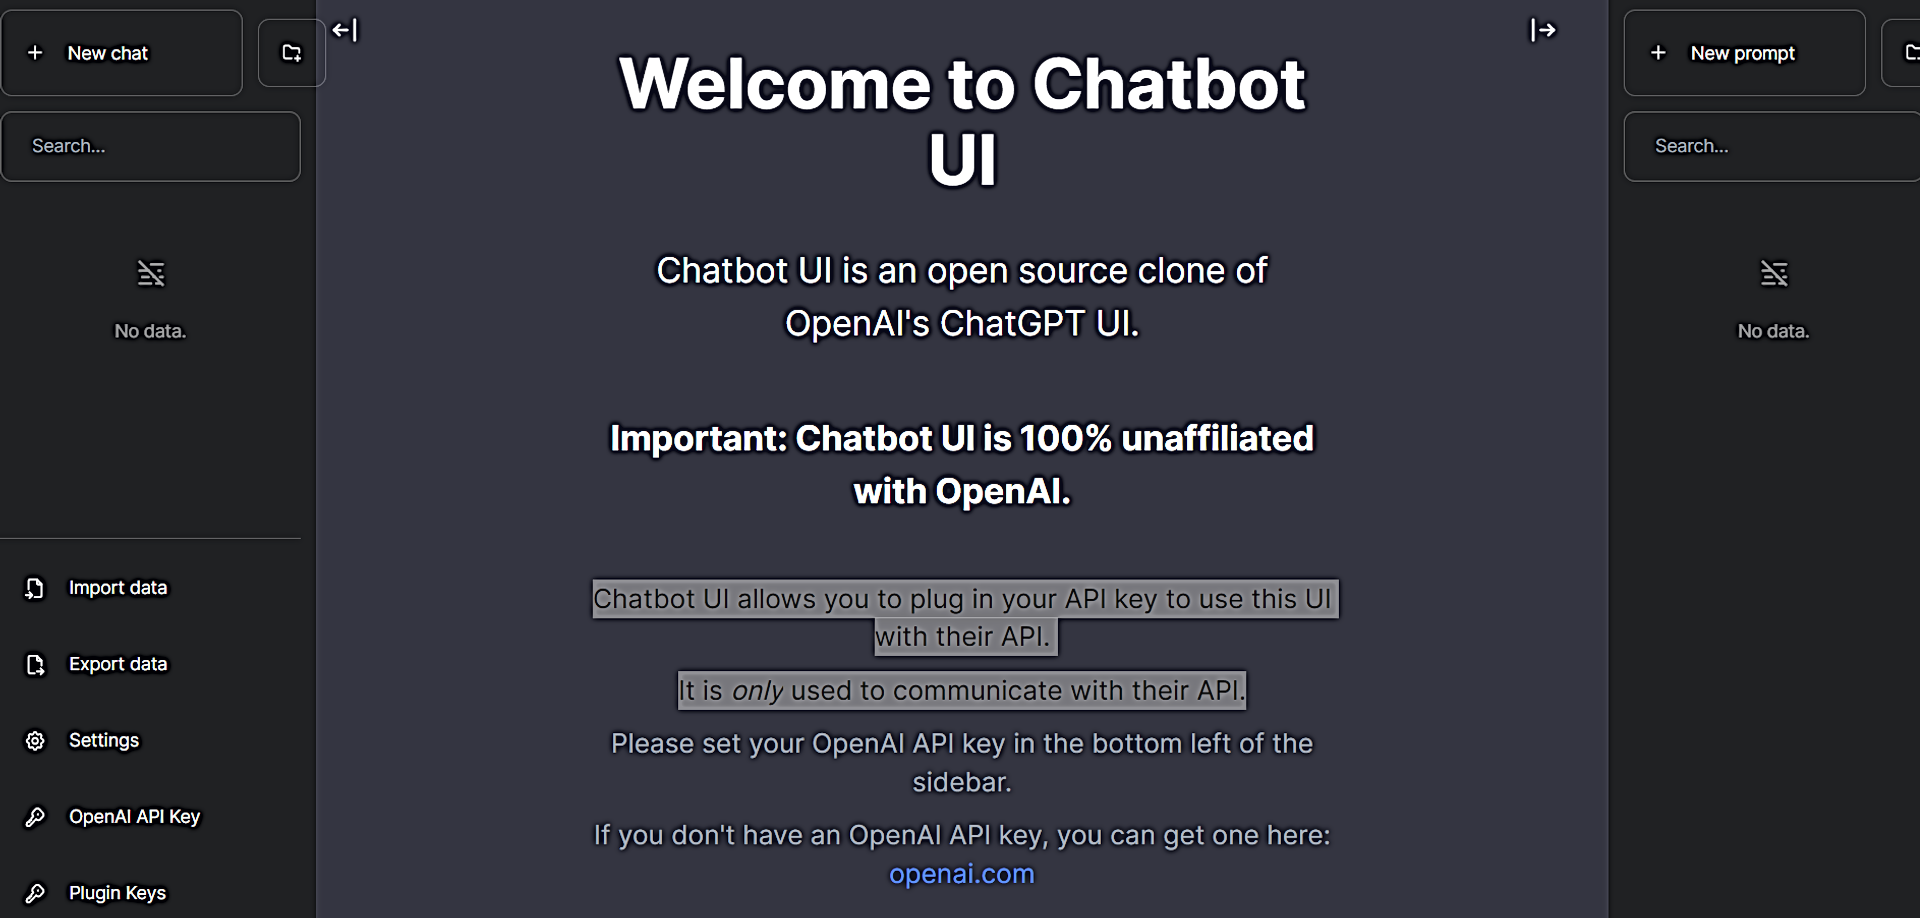 Chatbot UI featured